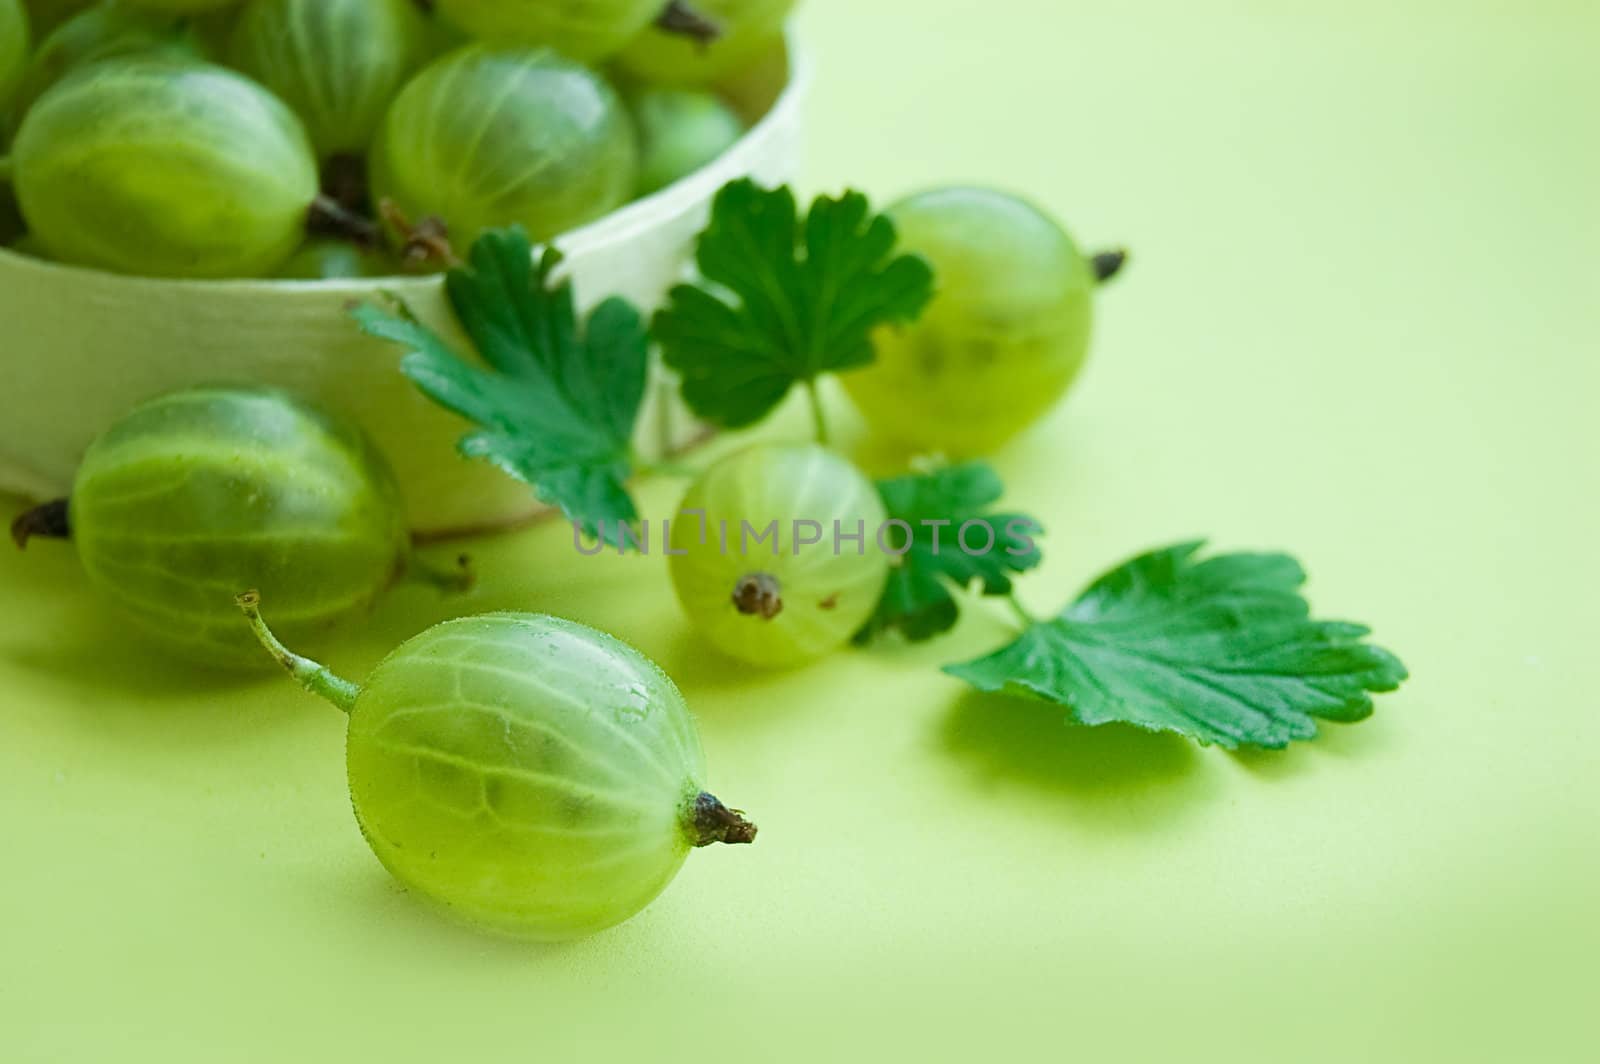 Gooseberries with leaves by Angel_a